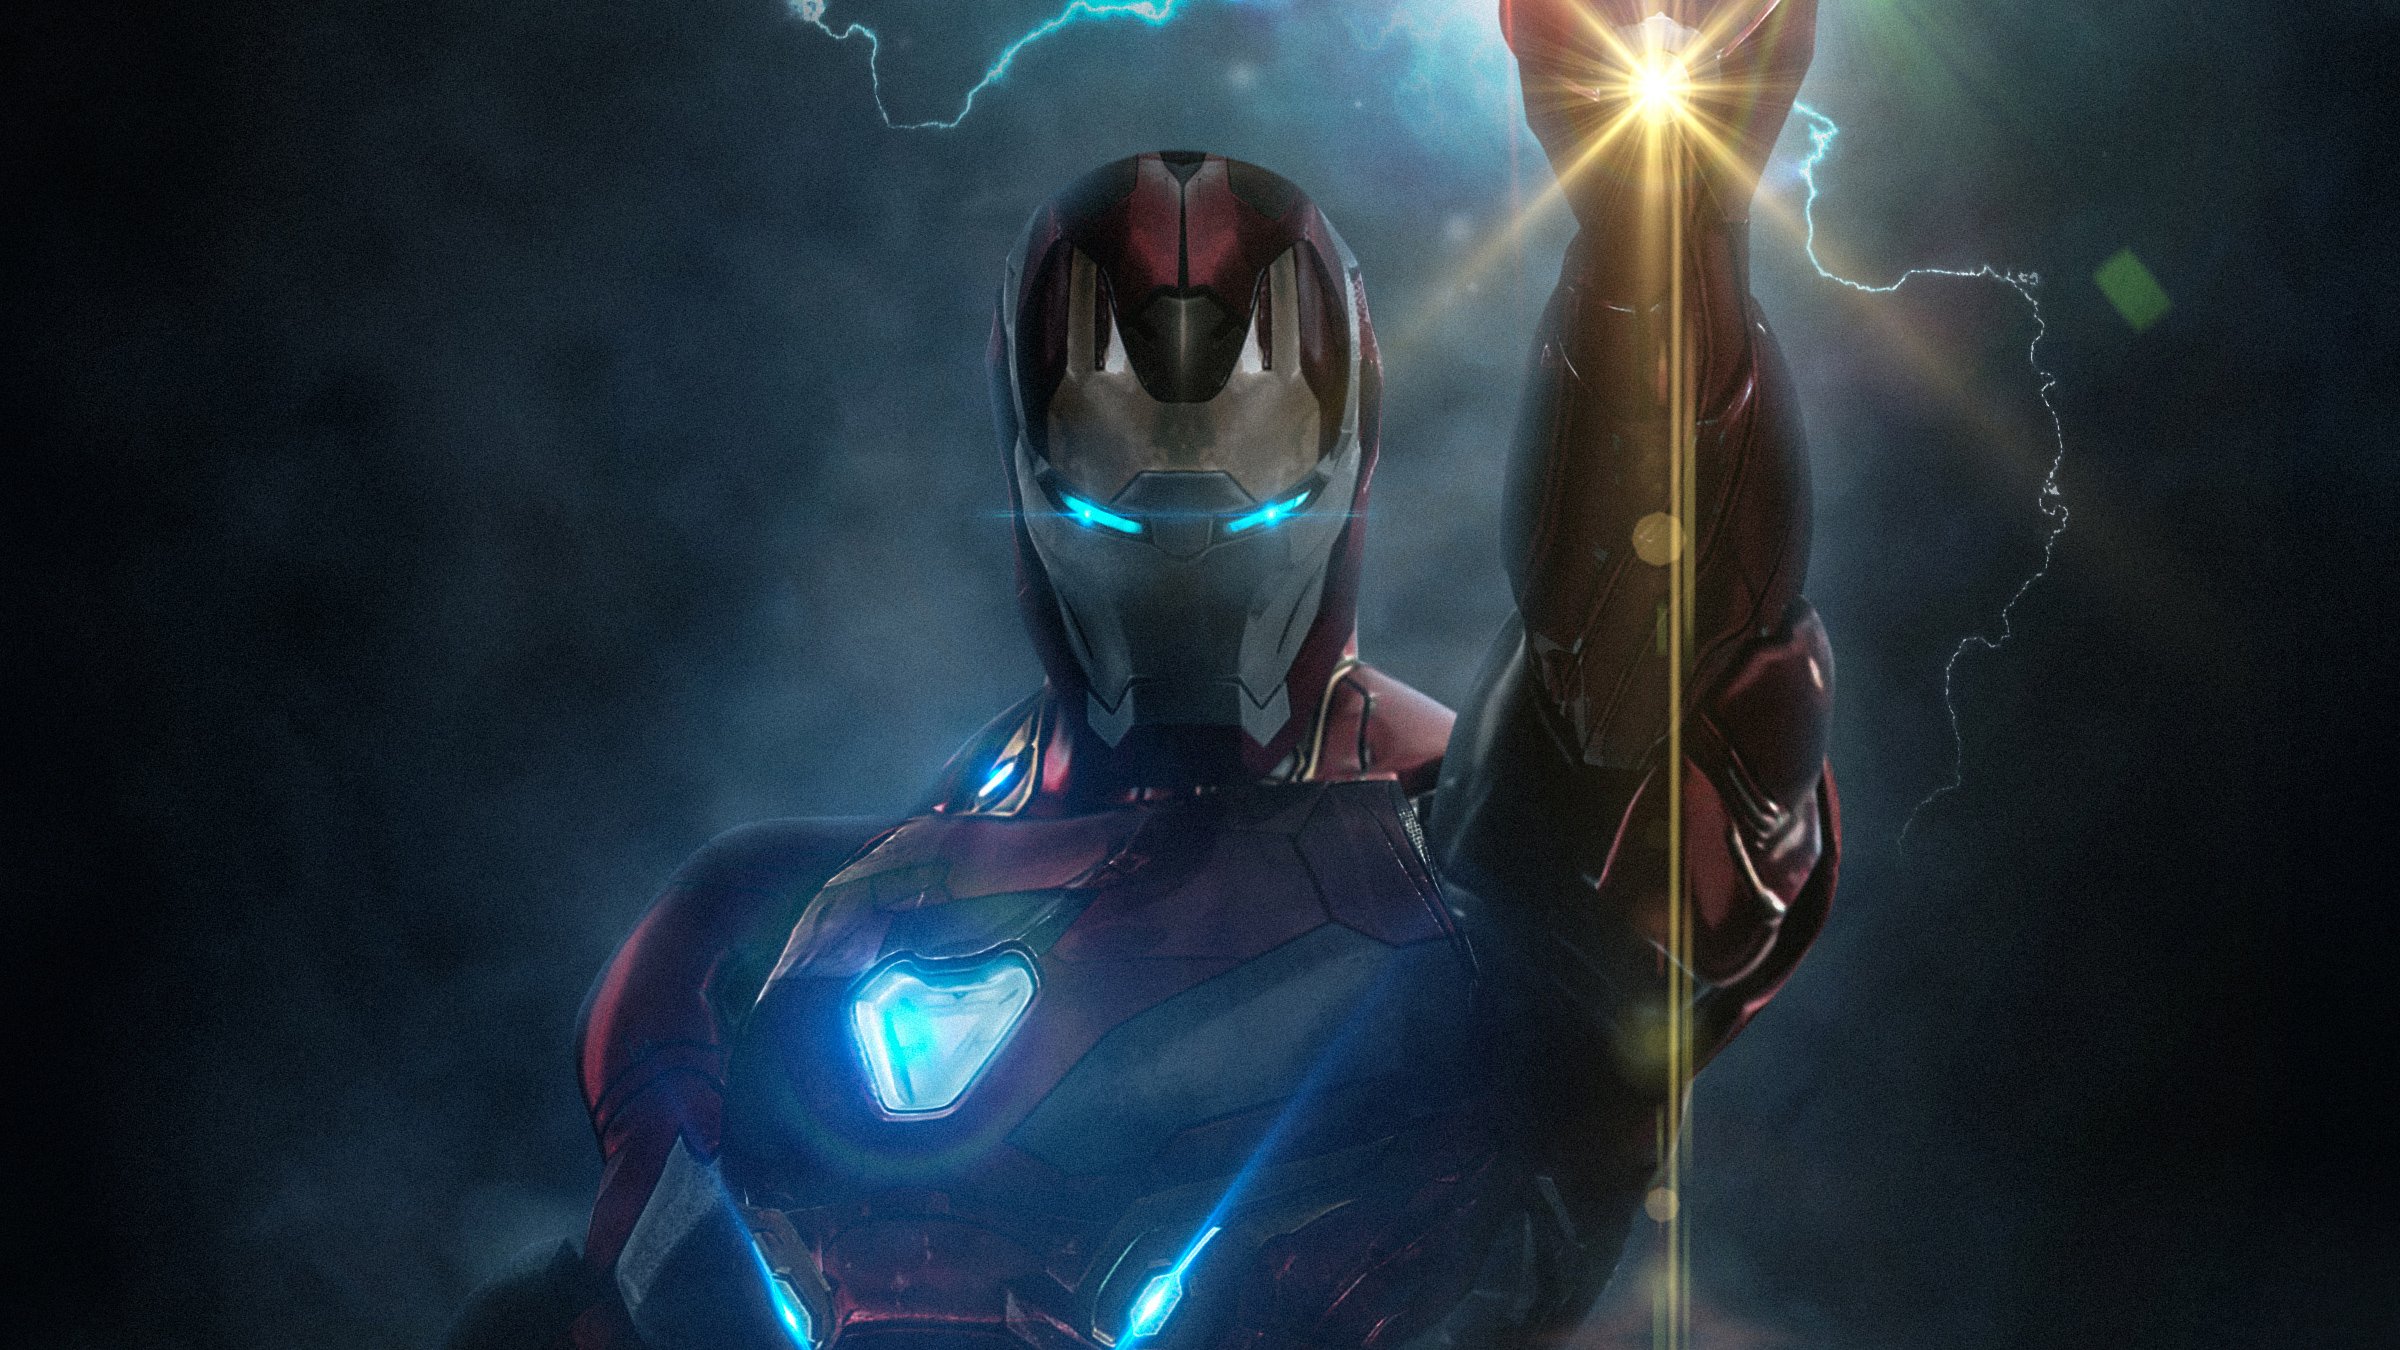 Best Iron Man Hd Wallpapers For Mobile